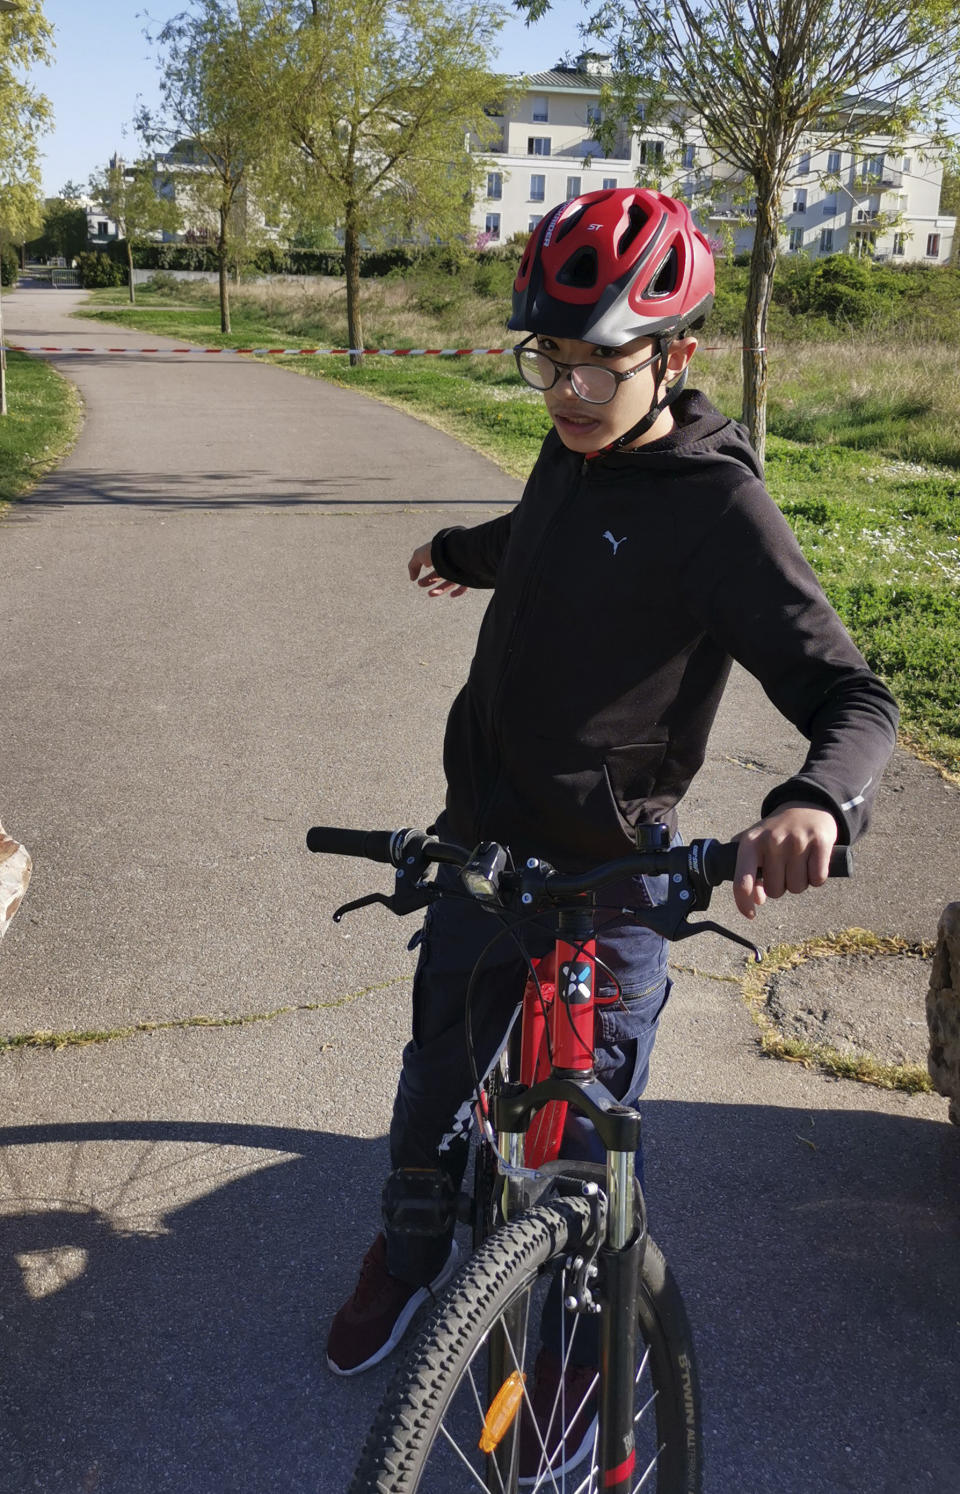 Mohammed, a 14-year-old with autism, on his bike outside his home Wednesday April 15, 2020 in Mantes-la-Jolie, west of Paris. France's confinement measures provide an exception for people with autism that allows them to go out in places where they are accustomed to. Coronavirus lockdown is proving an ordeal for kids with disabilities and their families who are having to care for them at home because special schools have been shut down to curb infections. (Courtesy of family via AP)